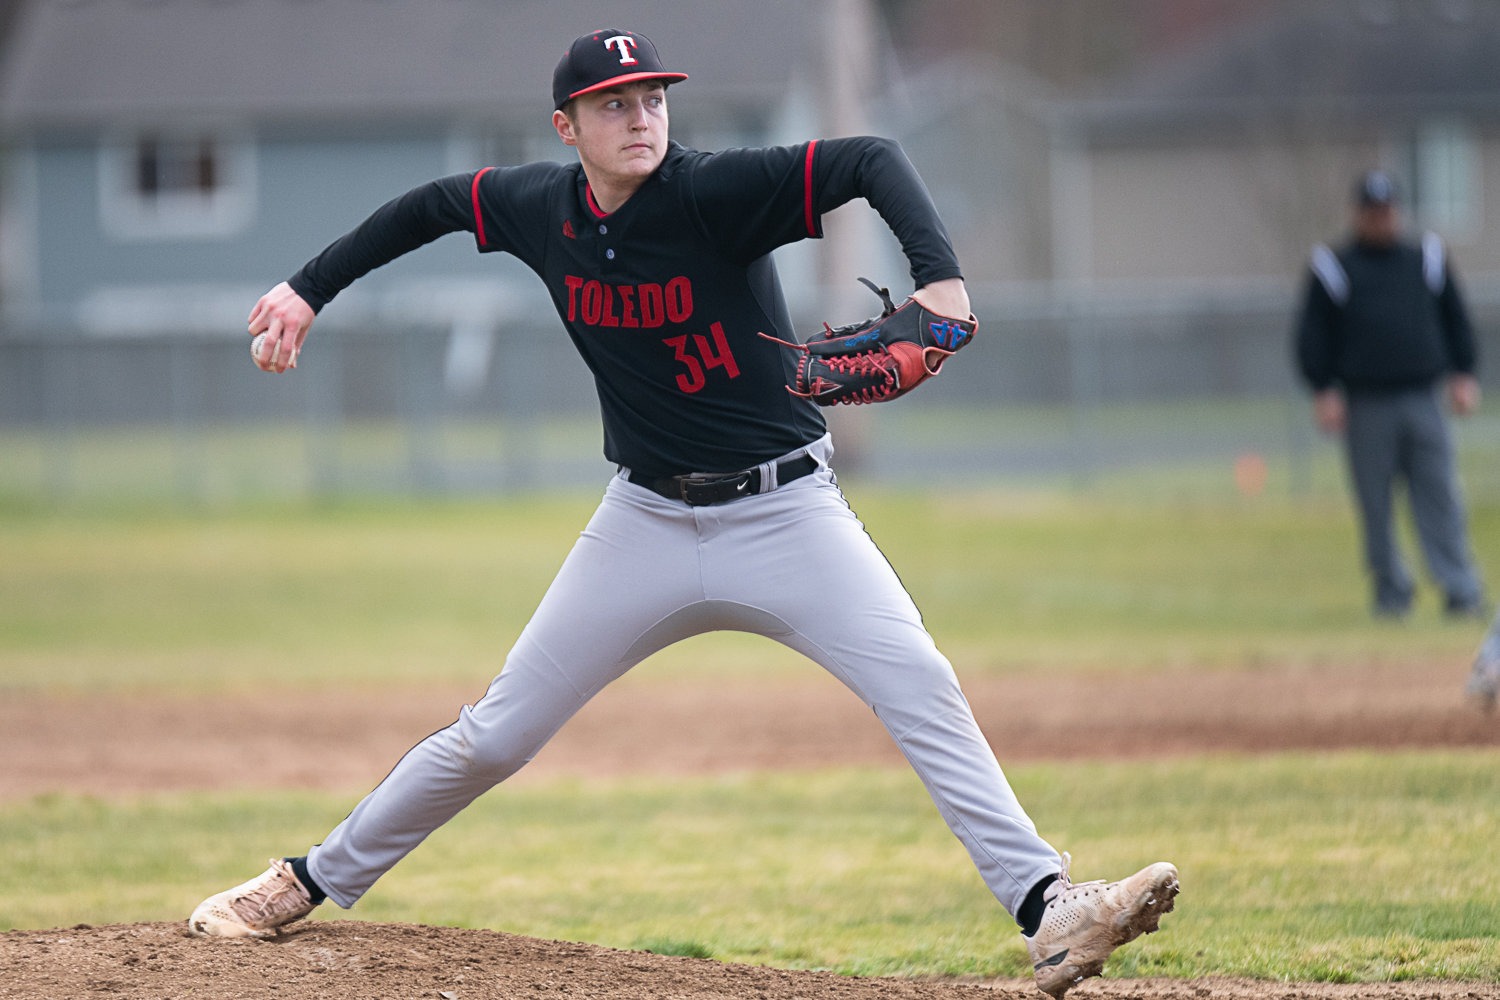 Caiden Schultz fires a pitch during Toledo's 4-1 win over Napavine in Game 1 of a doubleheader on March 20.